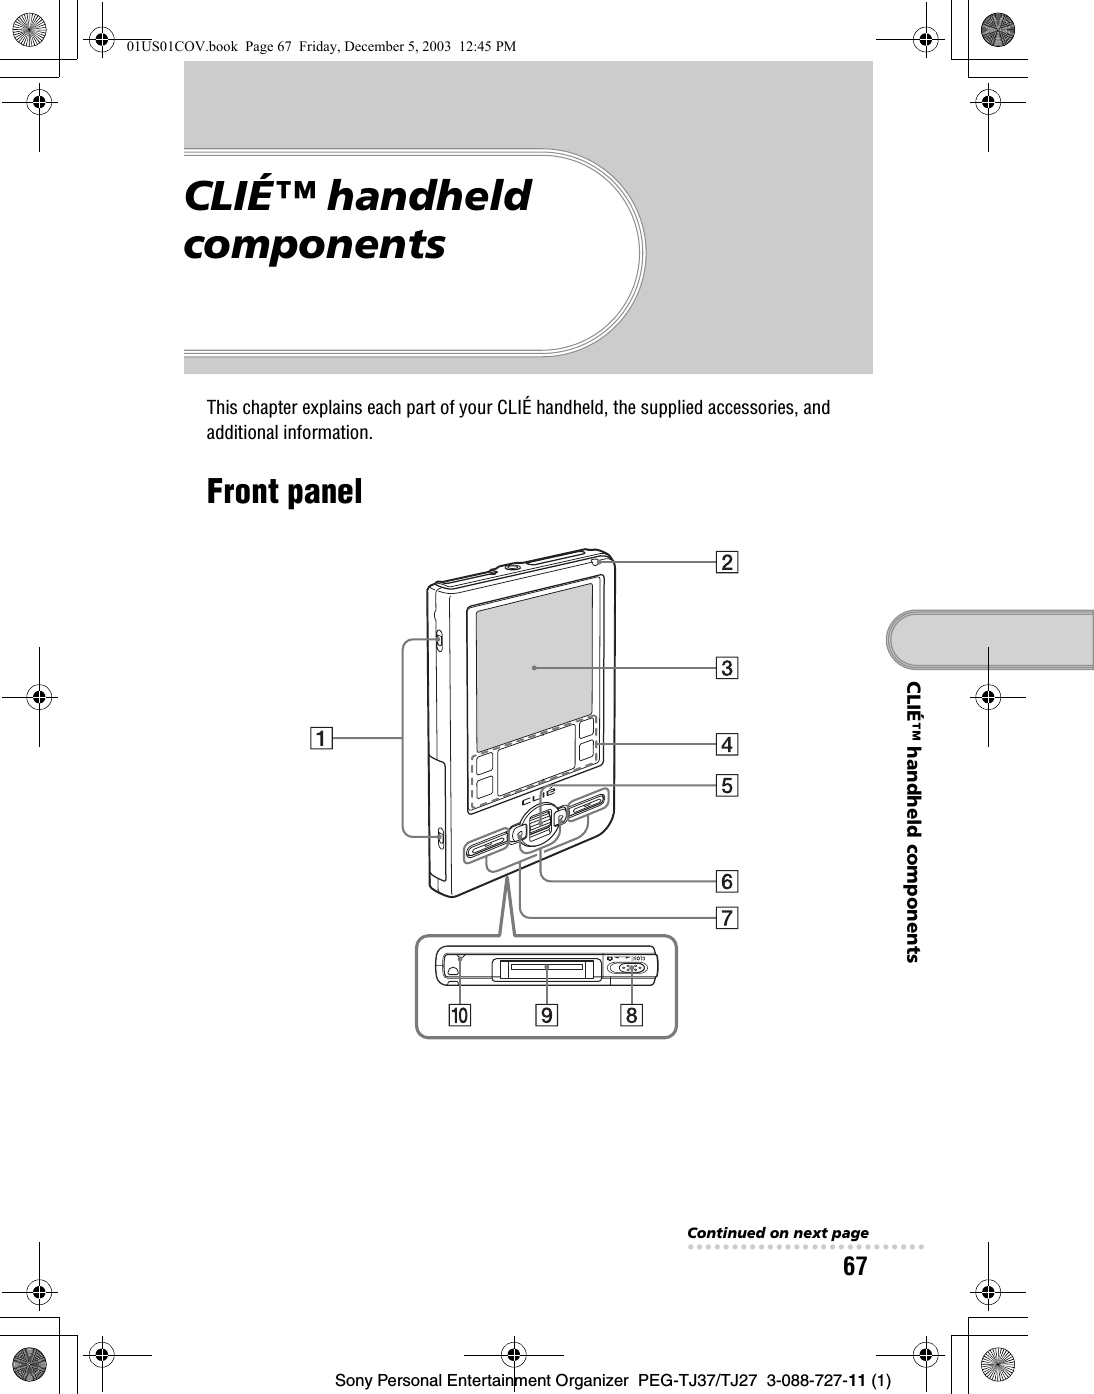 Sony Personal Entertainment Organizer  PEG-TJ37/TJ27  3-088-727-11 (1)67CLIÉ™ handheld componentsCLIÉ™ handheld componentsThis chapter explains each part of your CLIÉ handheld, the supplied accessories, and additional information.Front panelContinued on next page• • • • • • • • • • • • • • • • • • • • • • • • • • •01US01COV.book  Page 67  Friday, December 5, 2003  12:45 PM